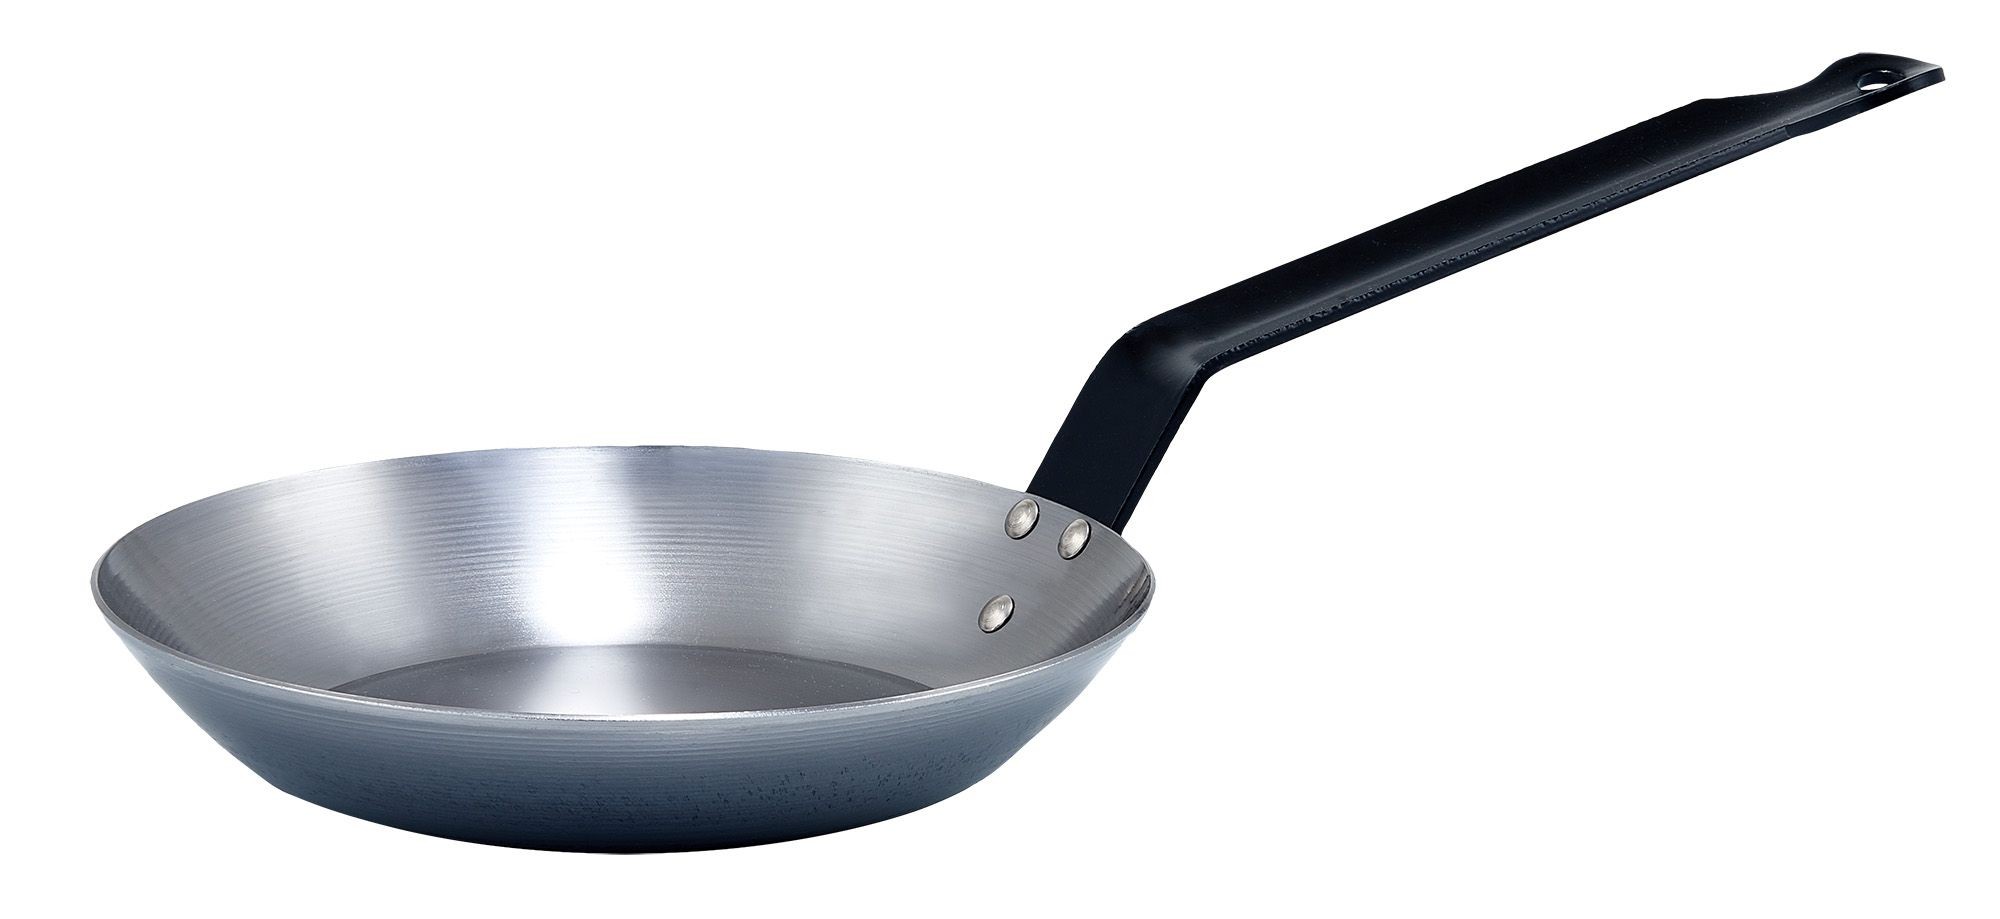 Winco CSFP-12 French Style Carbon Steel Fry Pan 11-1/8